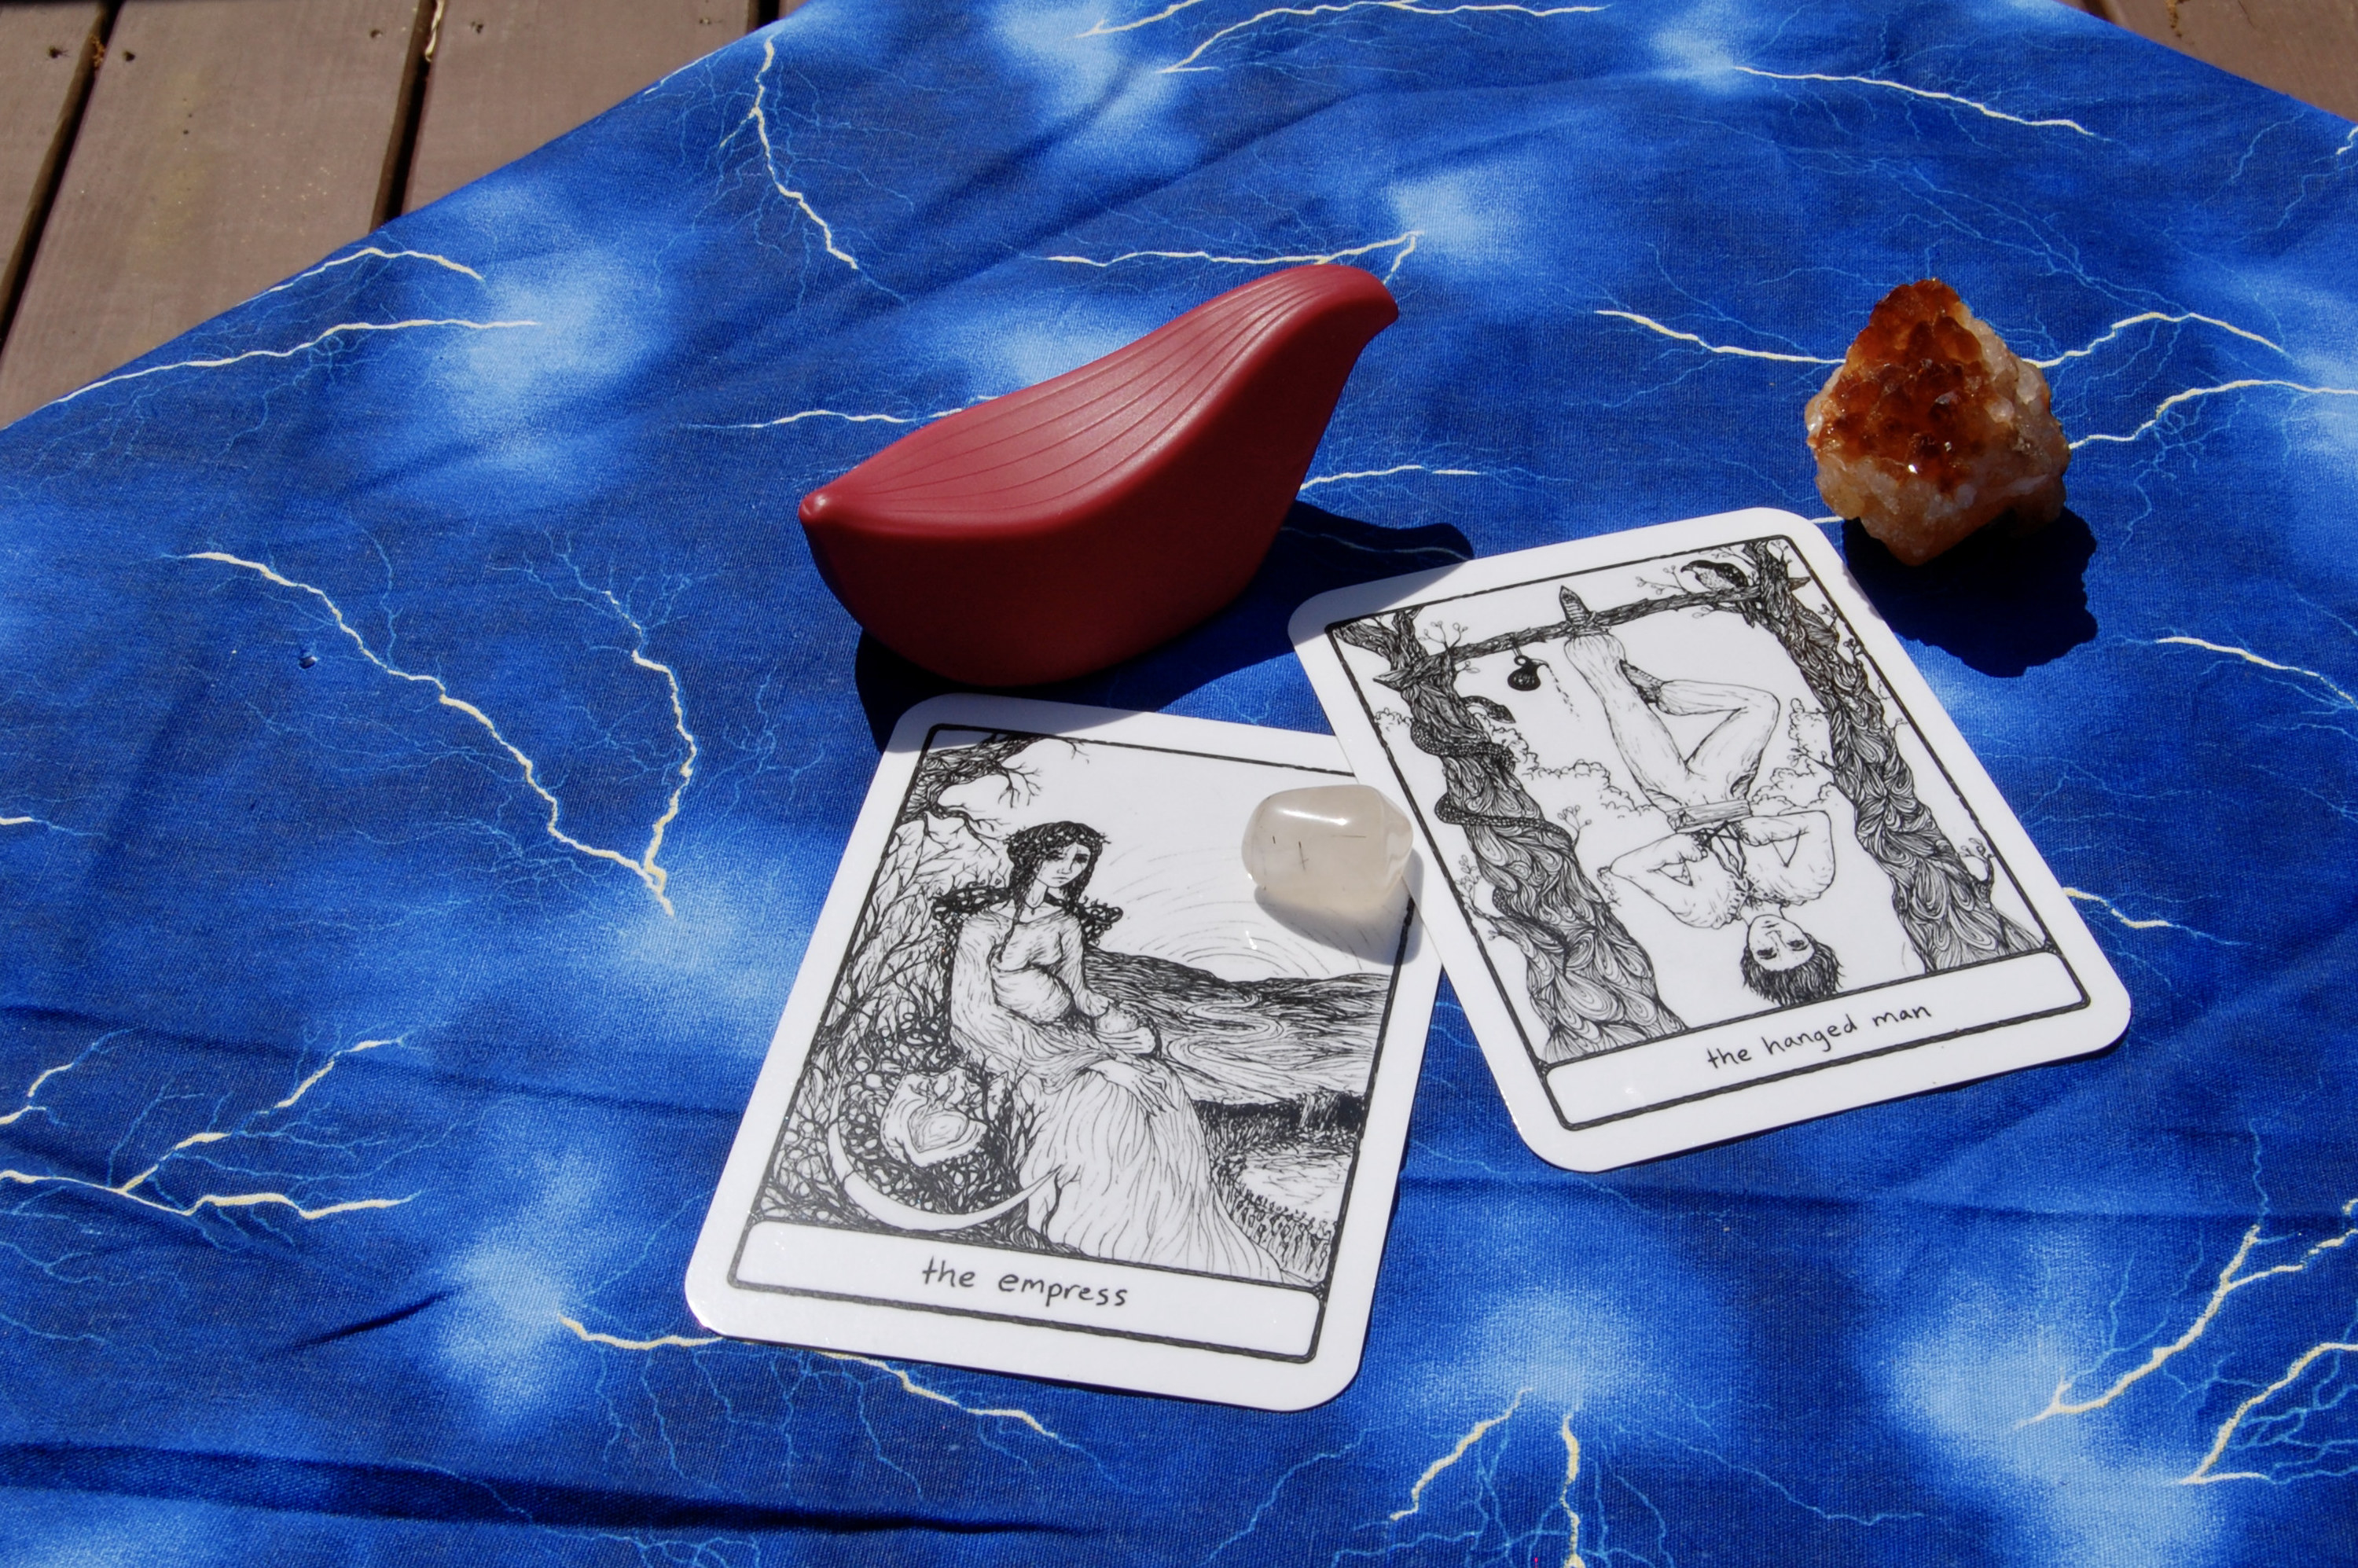 Photo of Iroha Tori with two tarot cards (the Empress and the Hanged Man), plus two small crystals